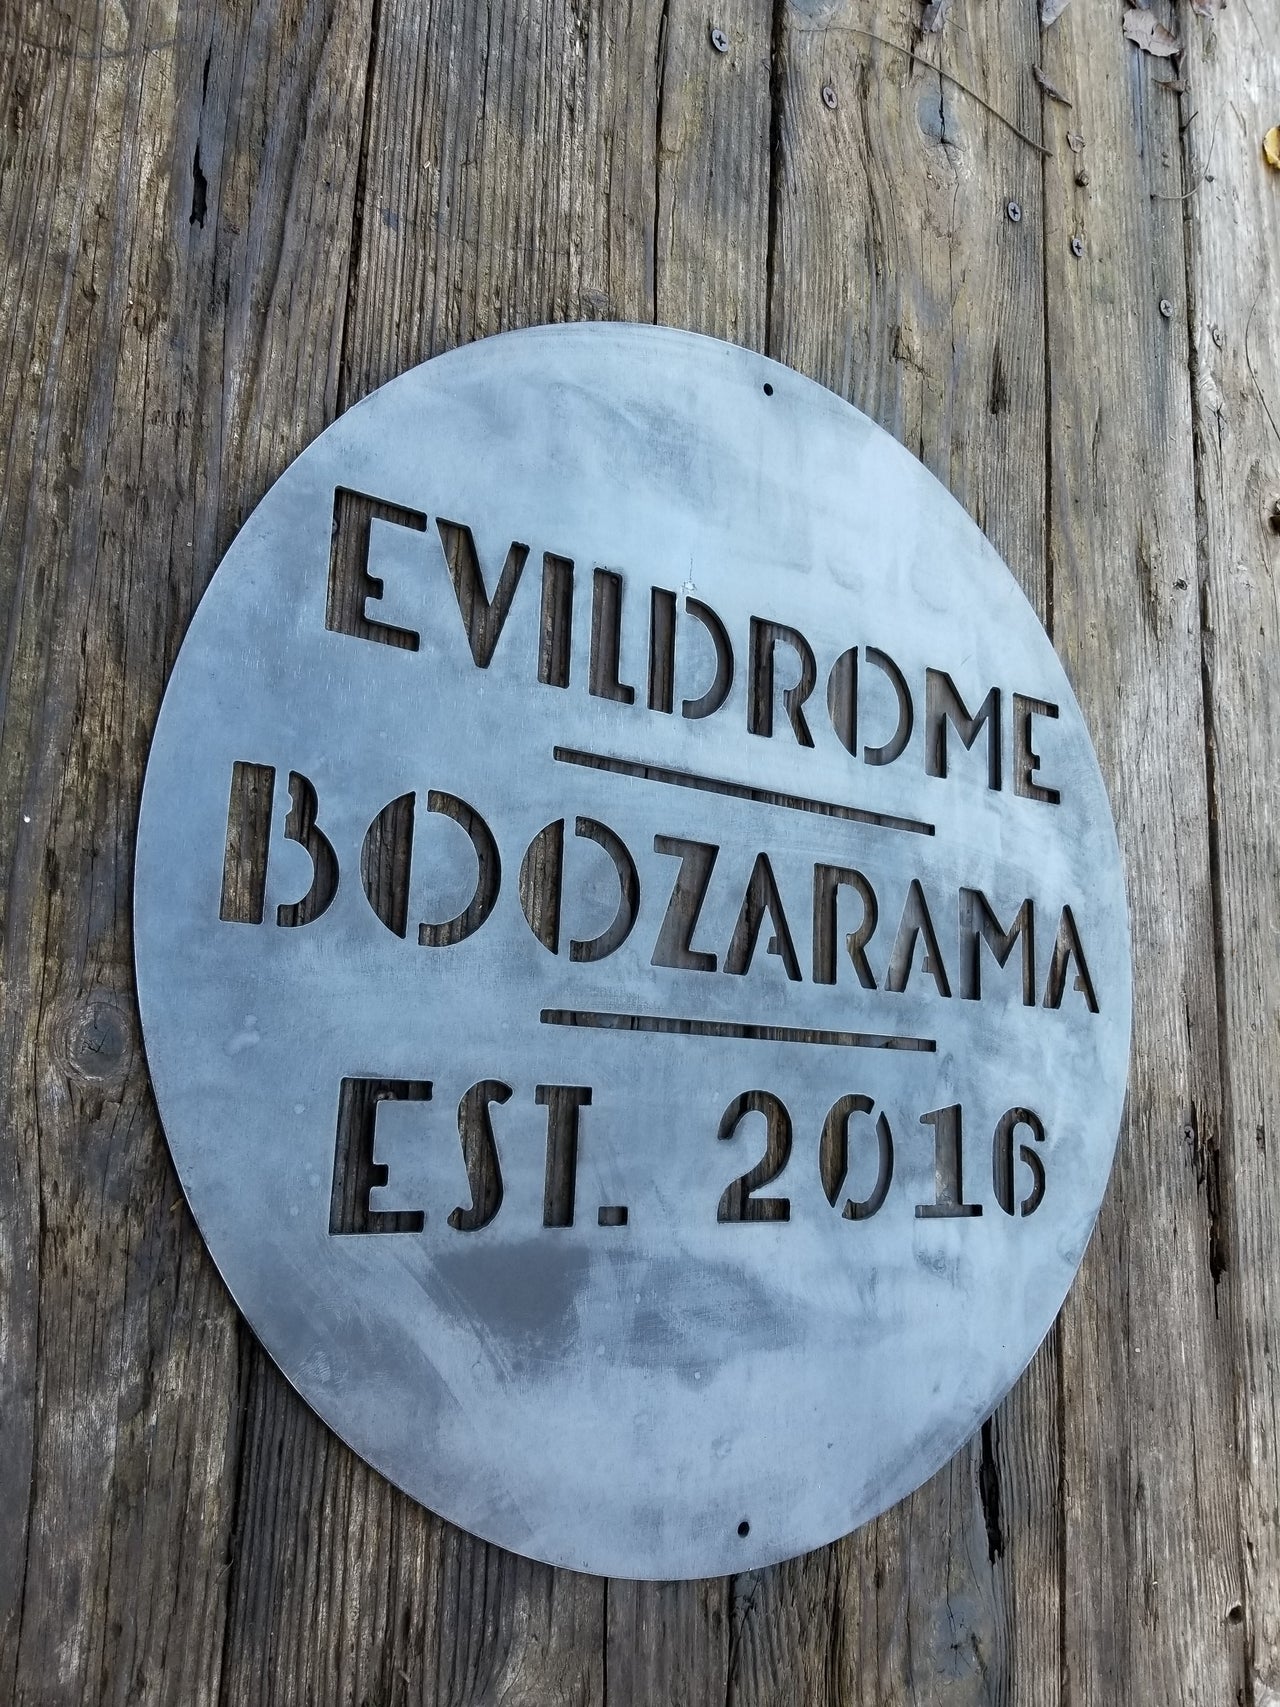 This is a round art deco sign that has three lines of text with a straight line seperating them. The sign reads, "Evildrome Boozarama Est. 2016"